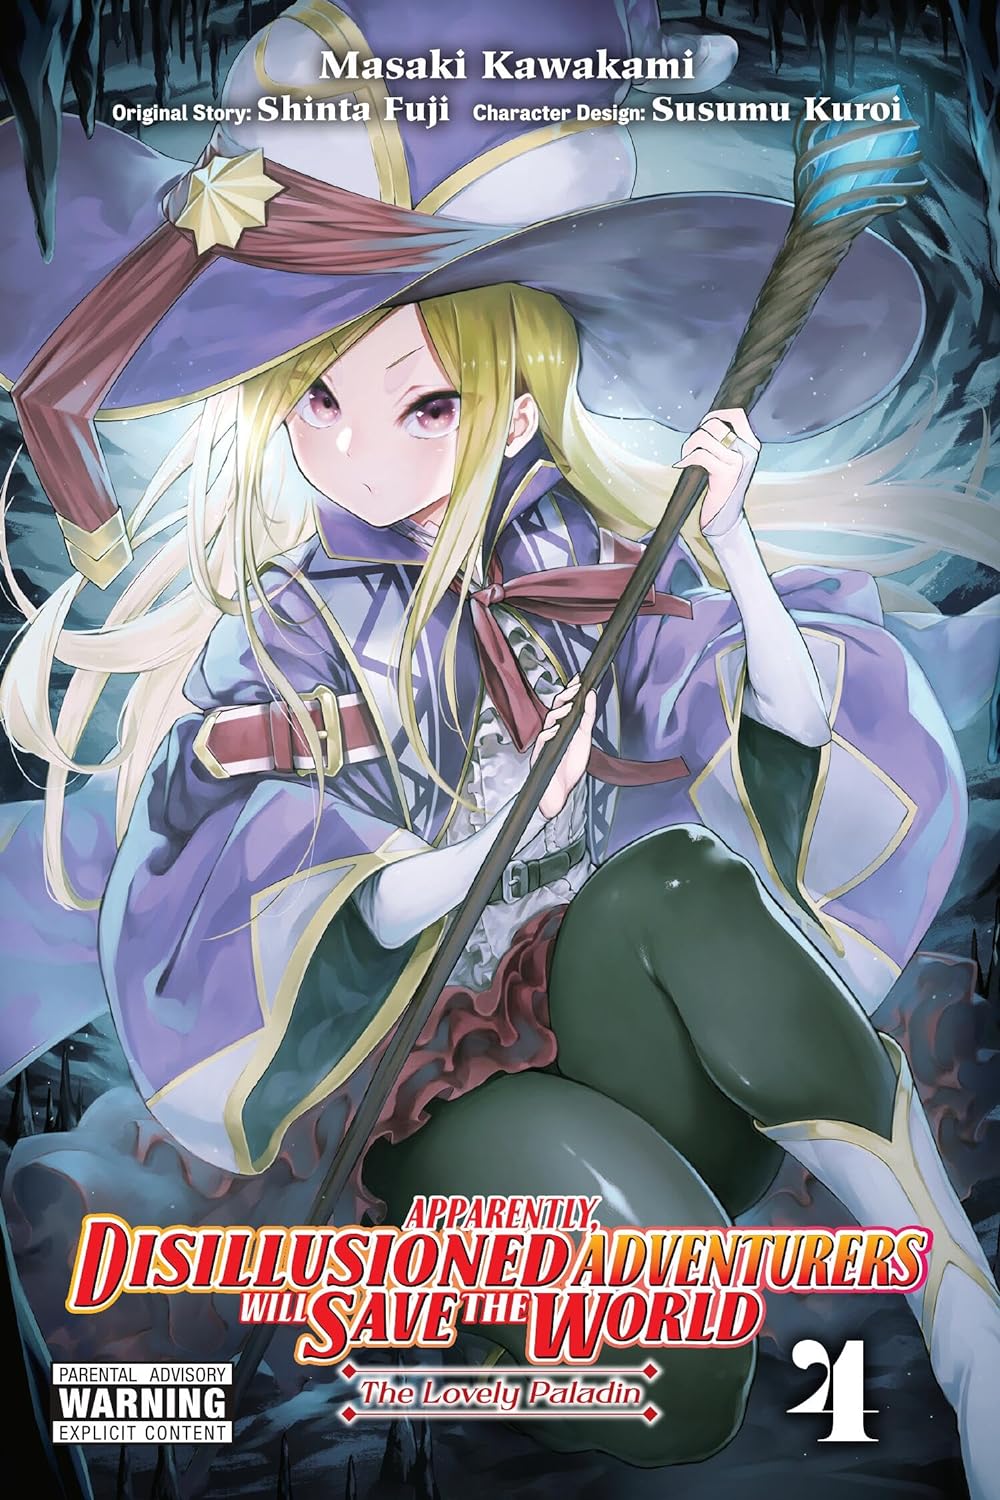 Apparently, Disillusioned Adventurers Will Save the World (Manga) Vol. 04